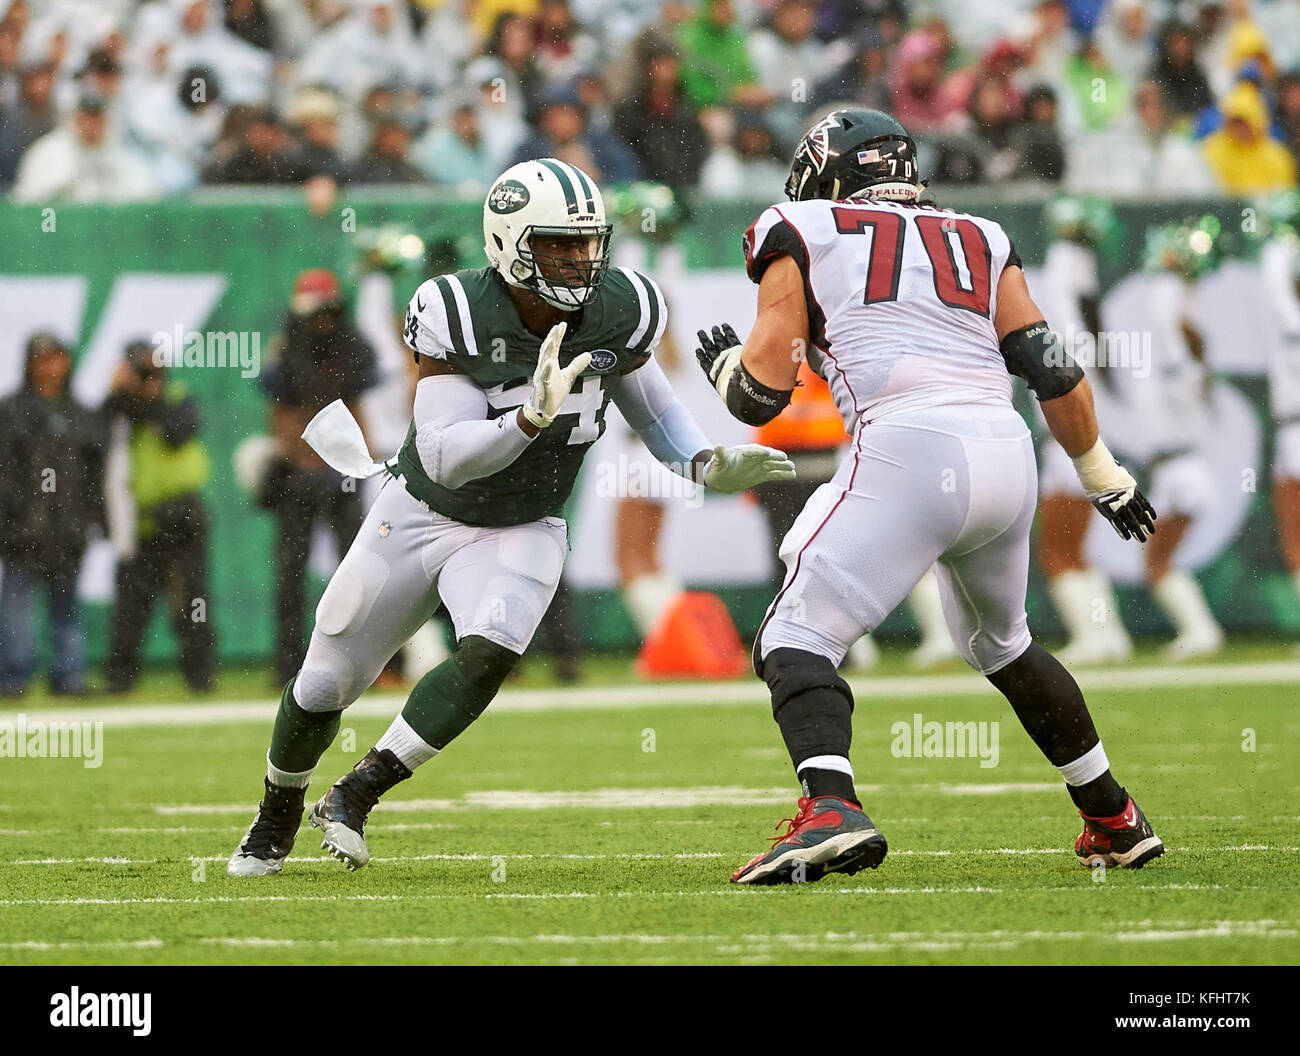 East Rutherford, New Jersey, USA. 29th Oct, 2017. Jets' defensive linemen Kony Ealy (94) tries to get around Falcons tackle Jake Matthews (70) during NFL action between the Atlanta Falcons and the New York Jets at MetLife Stadium in East Rutherford, New Jersey. Duncan Williams/CSM/Alamy Live News Stock Photo